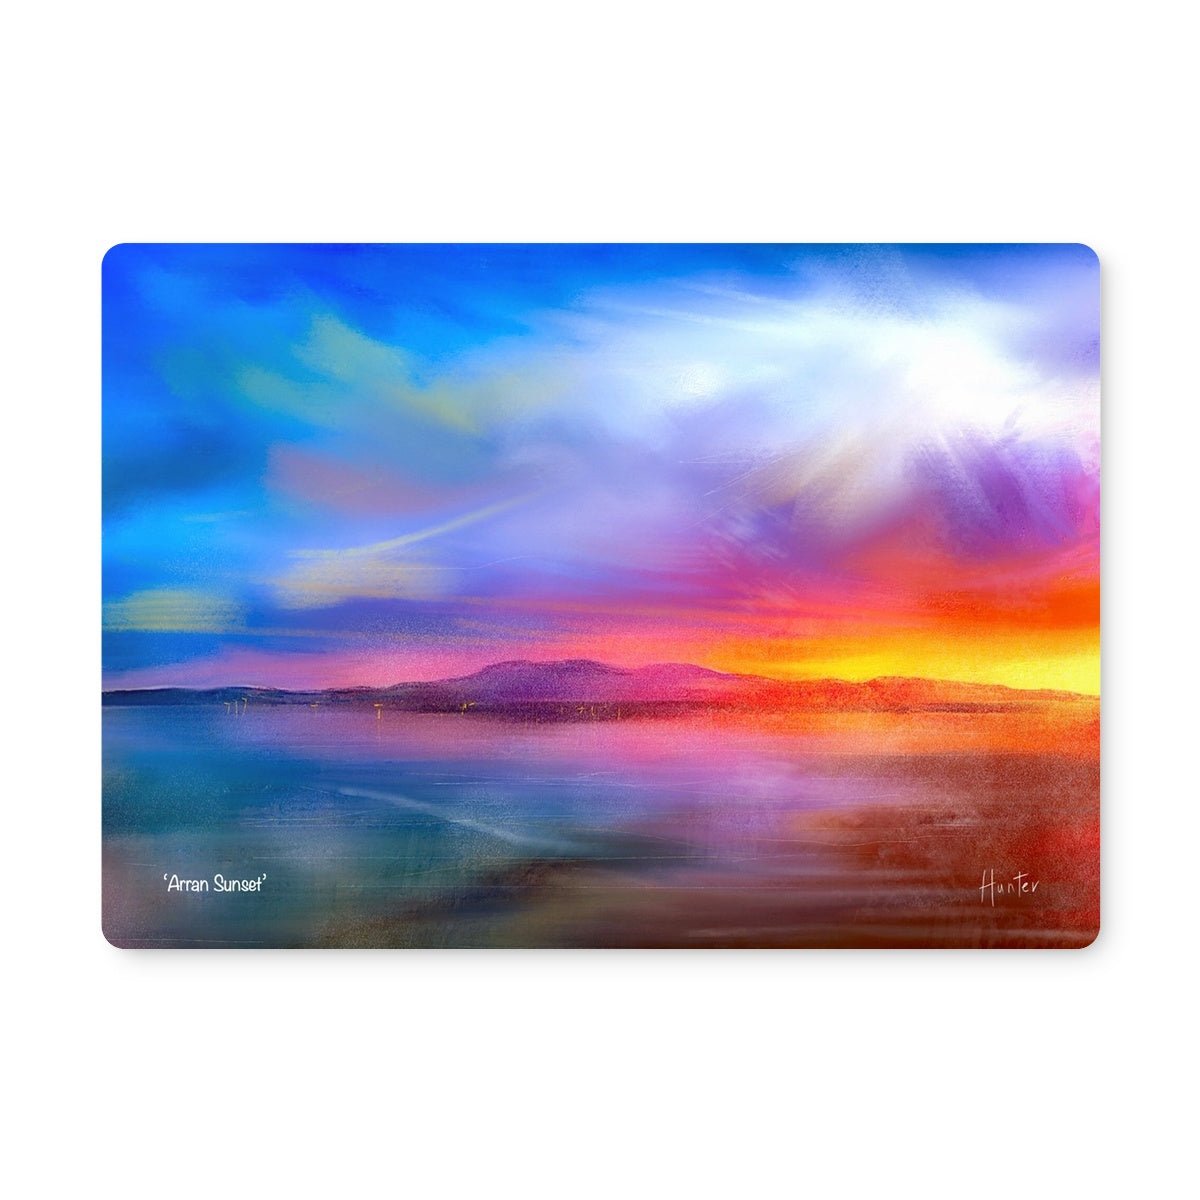 Arran Sunset Art Gifts Placemat-Placemats-Arran Art Gallery-6 Placemats-Paintings, Prints, Homeware, Art Gifts From Scotland By Scottish Artist Kevin Hunter